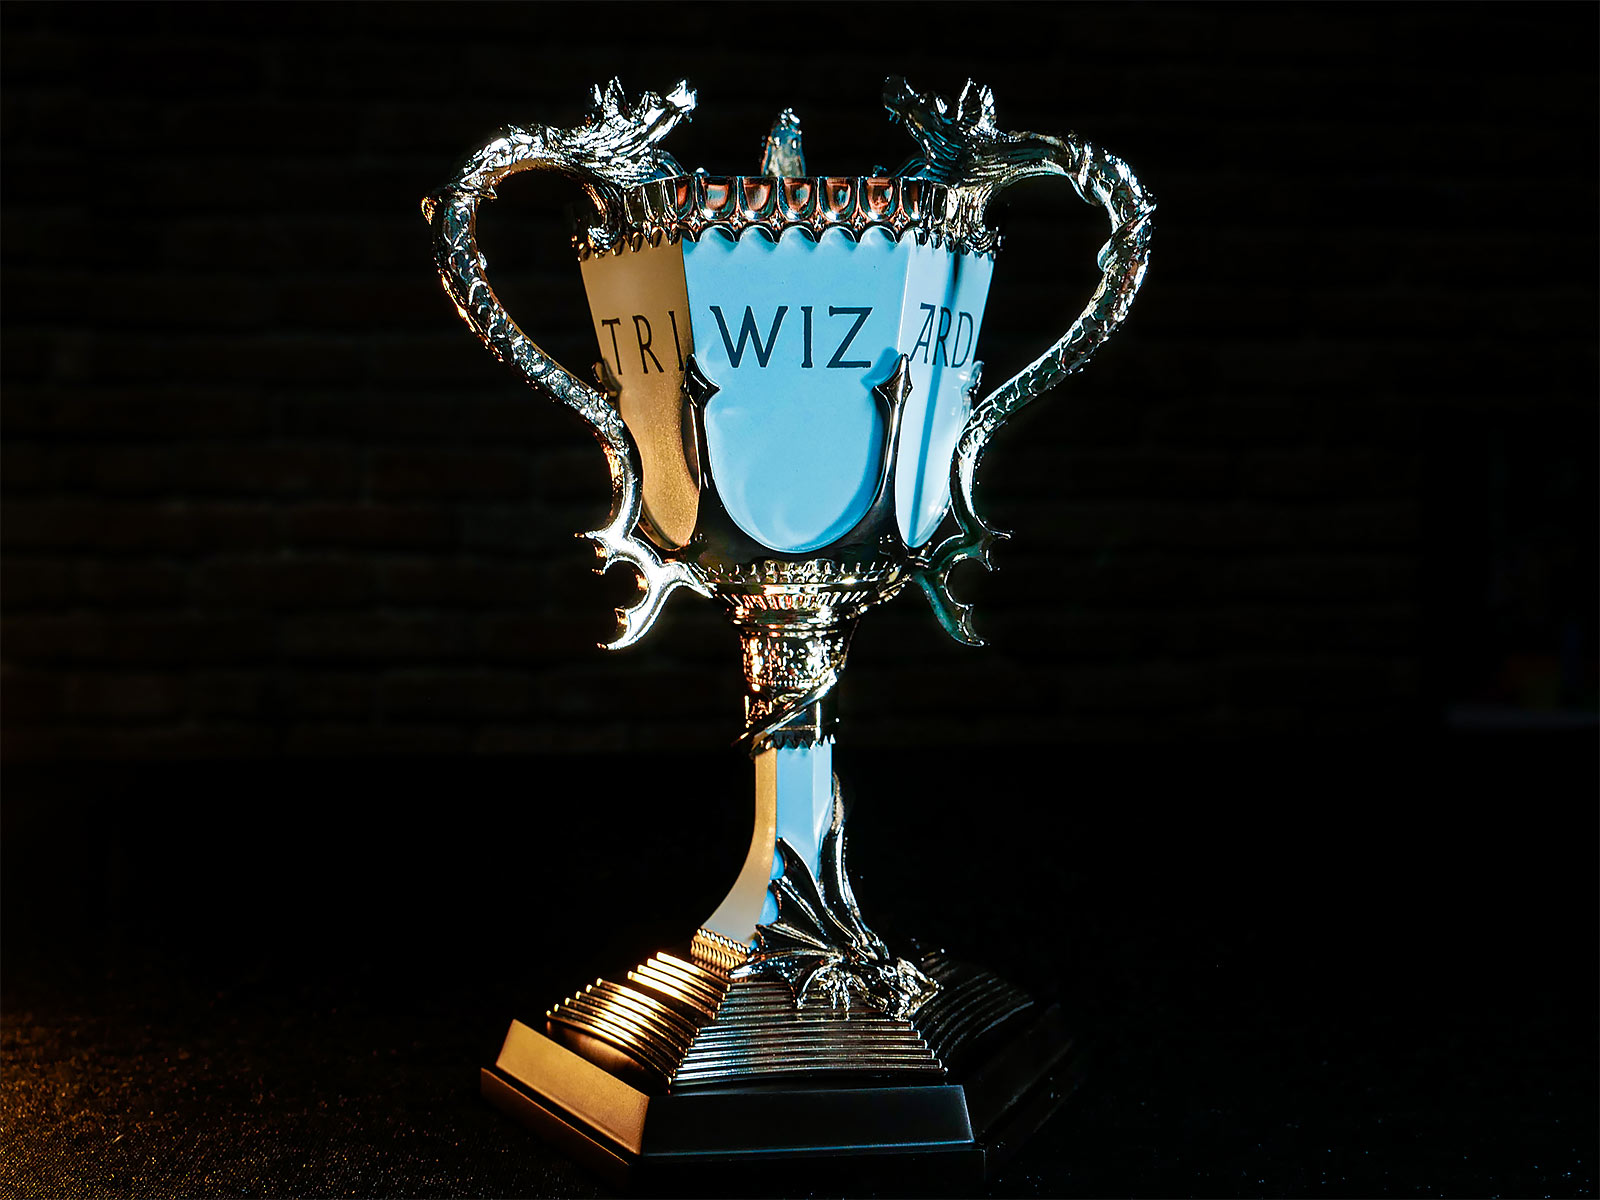 The Triwizard Cup